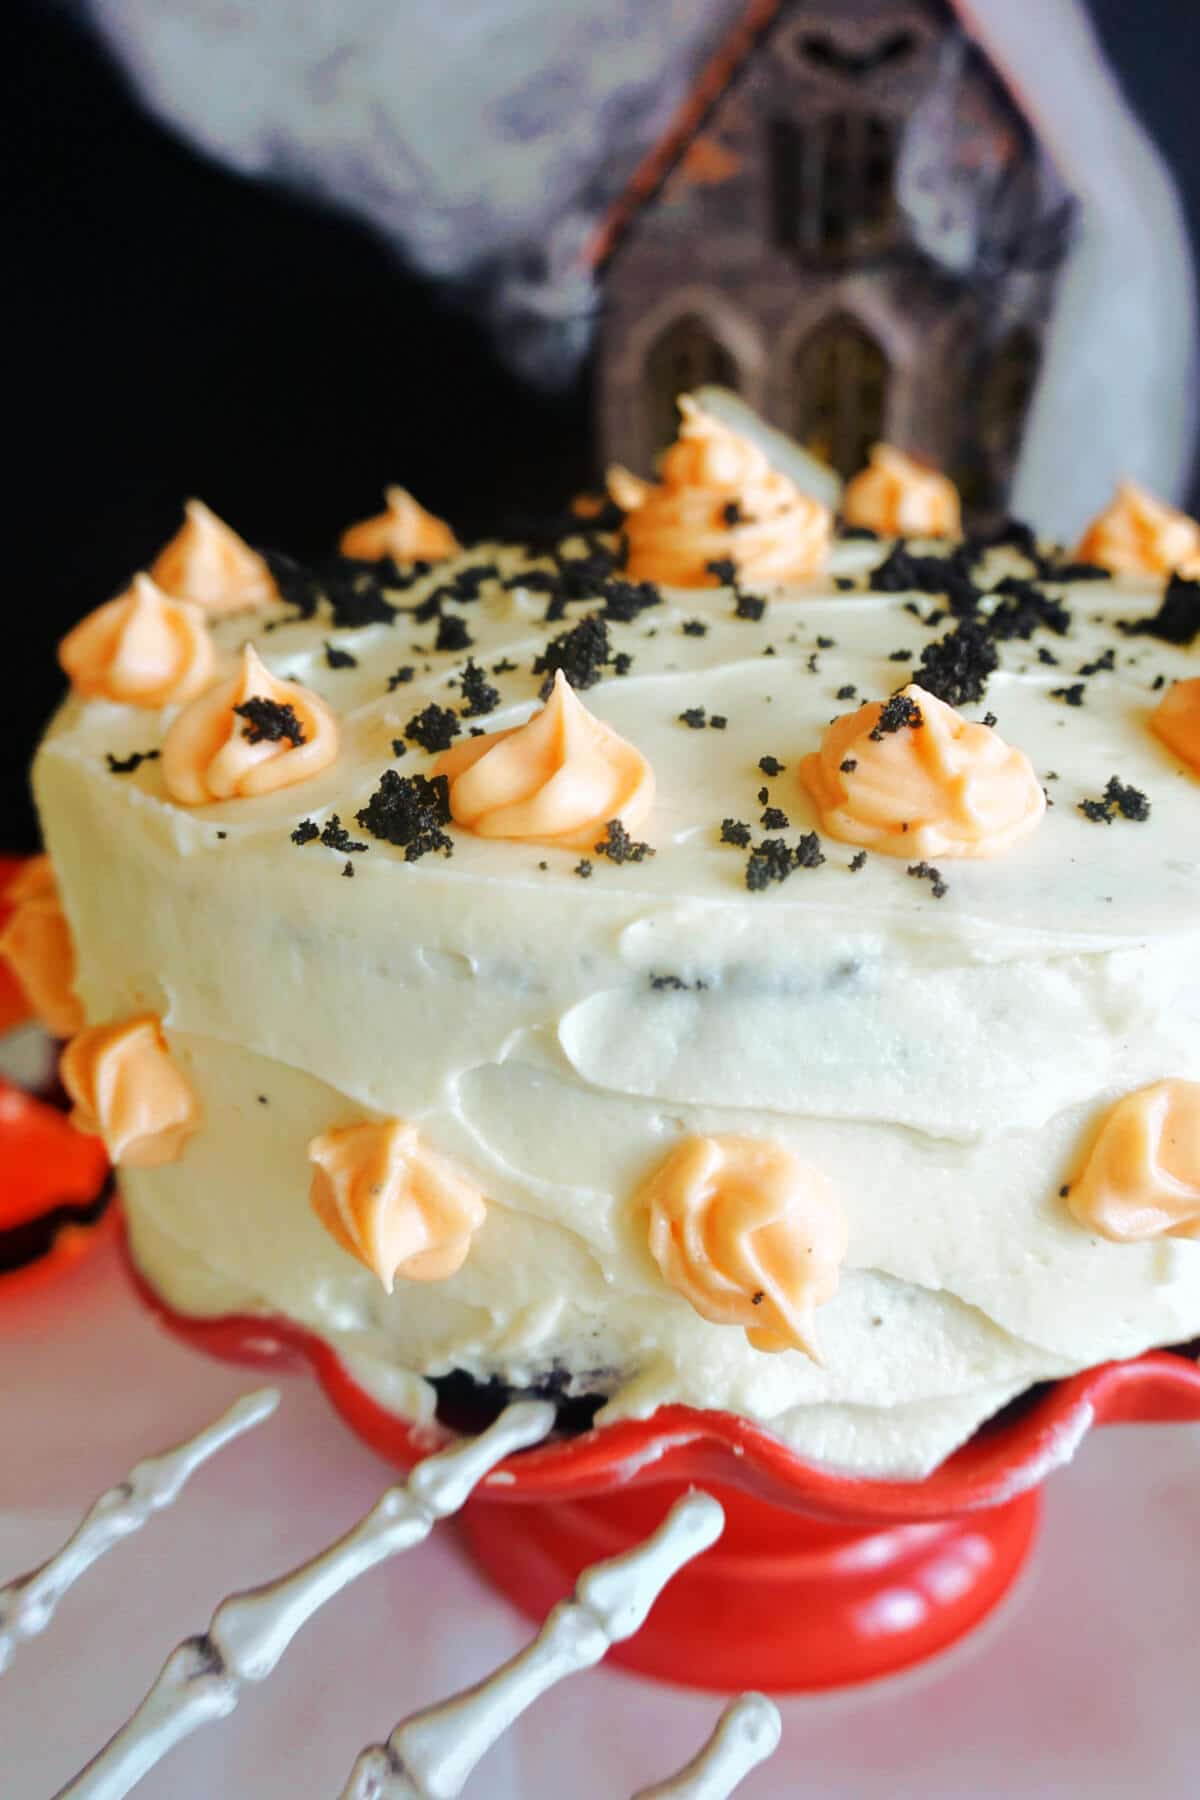 A black velvet cake covered with white buttercream frosting and decorated with orange cream swirls.